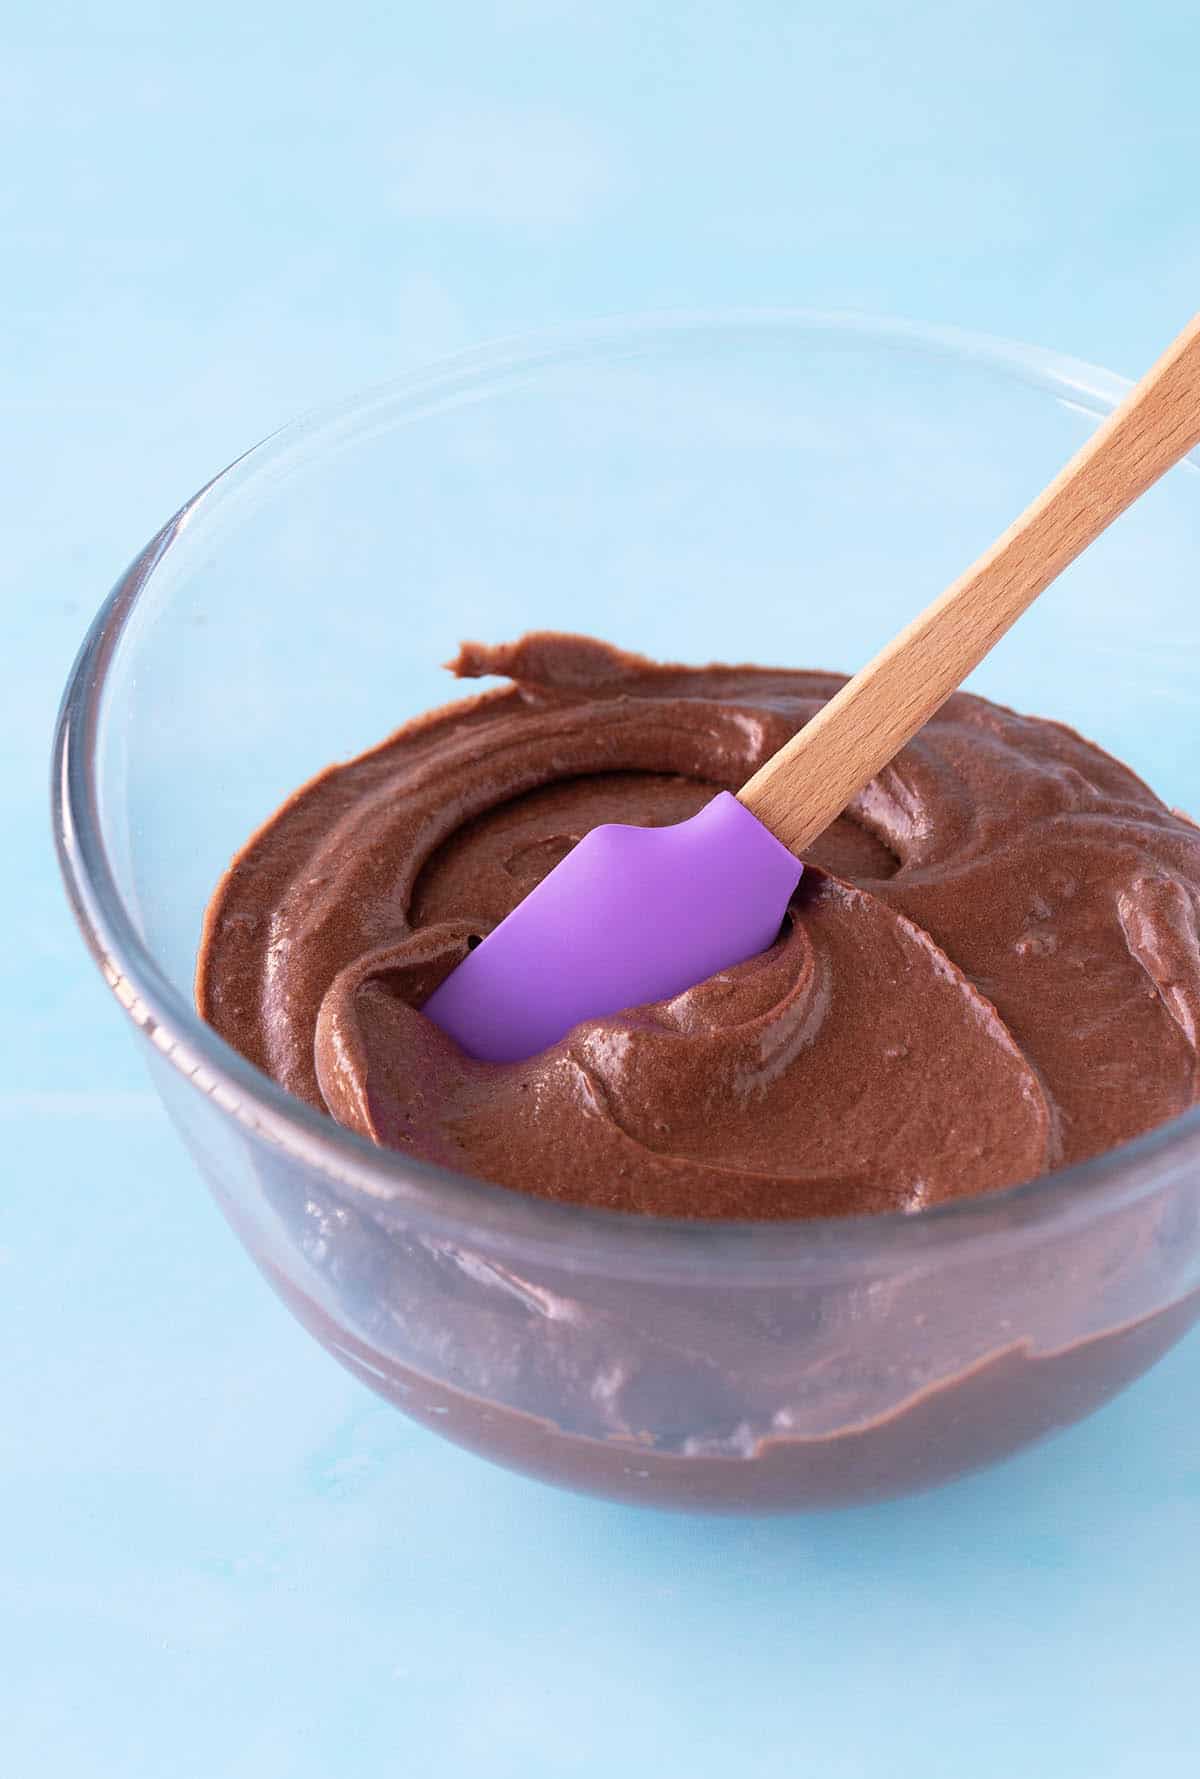 A glass bowl filled with silky smooth chocolate cake batter